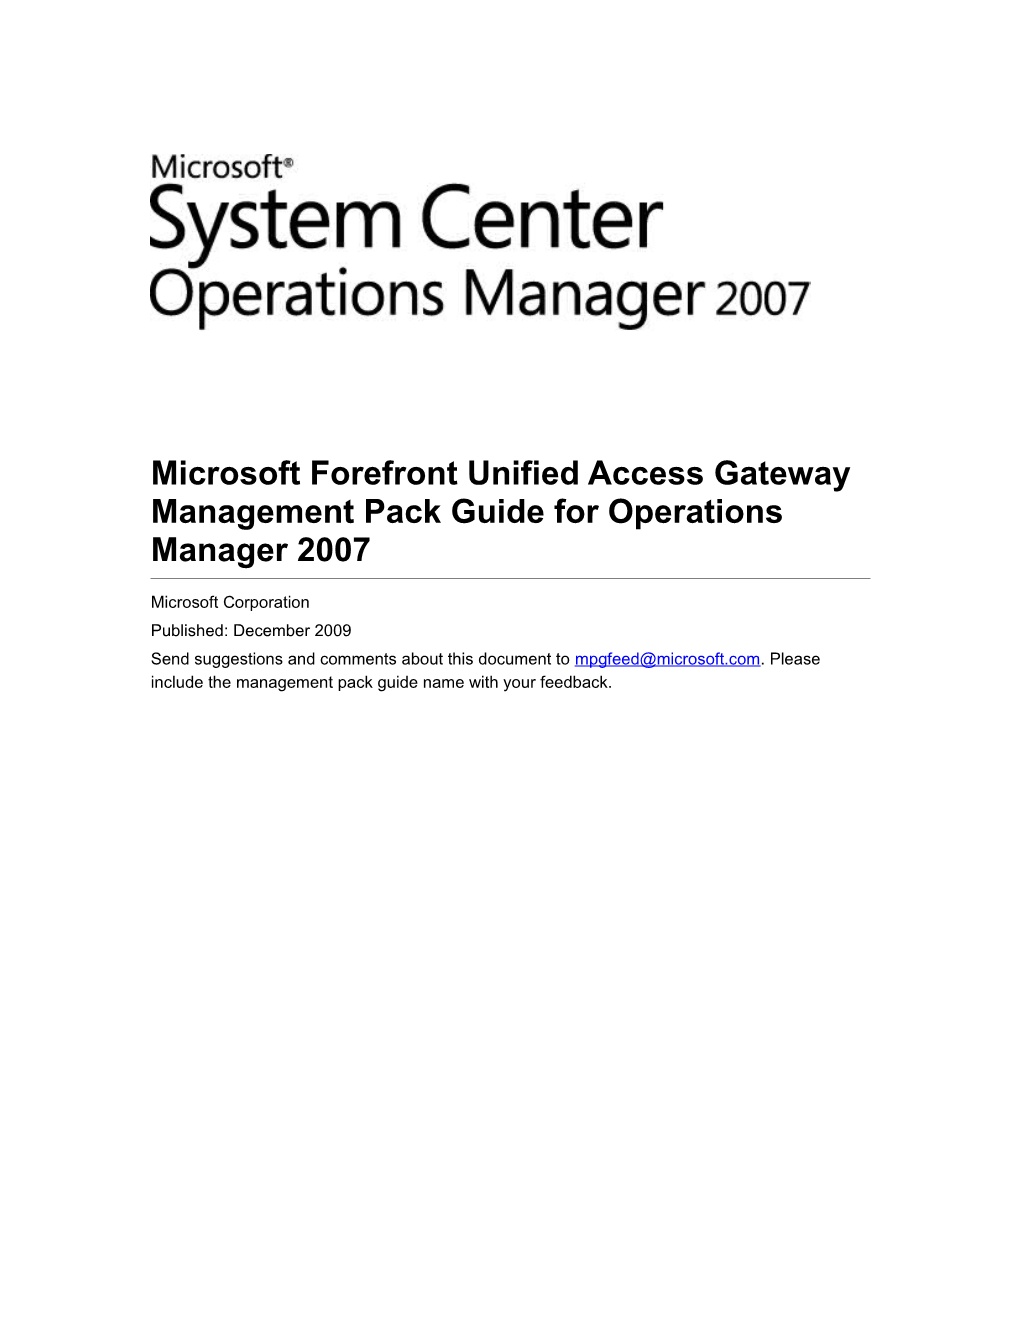 Microsoft Forefront Unified Access Gateway Management Pack Guide for Operations Manager 2007